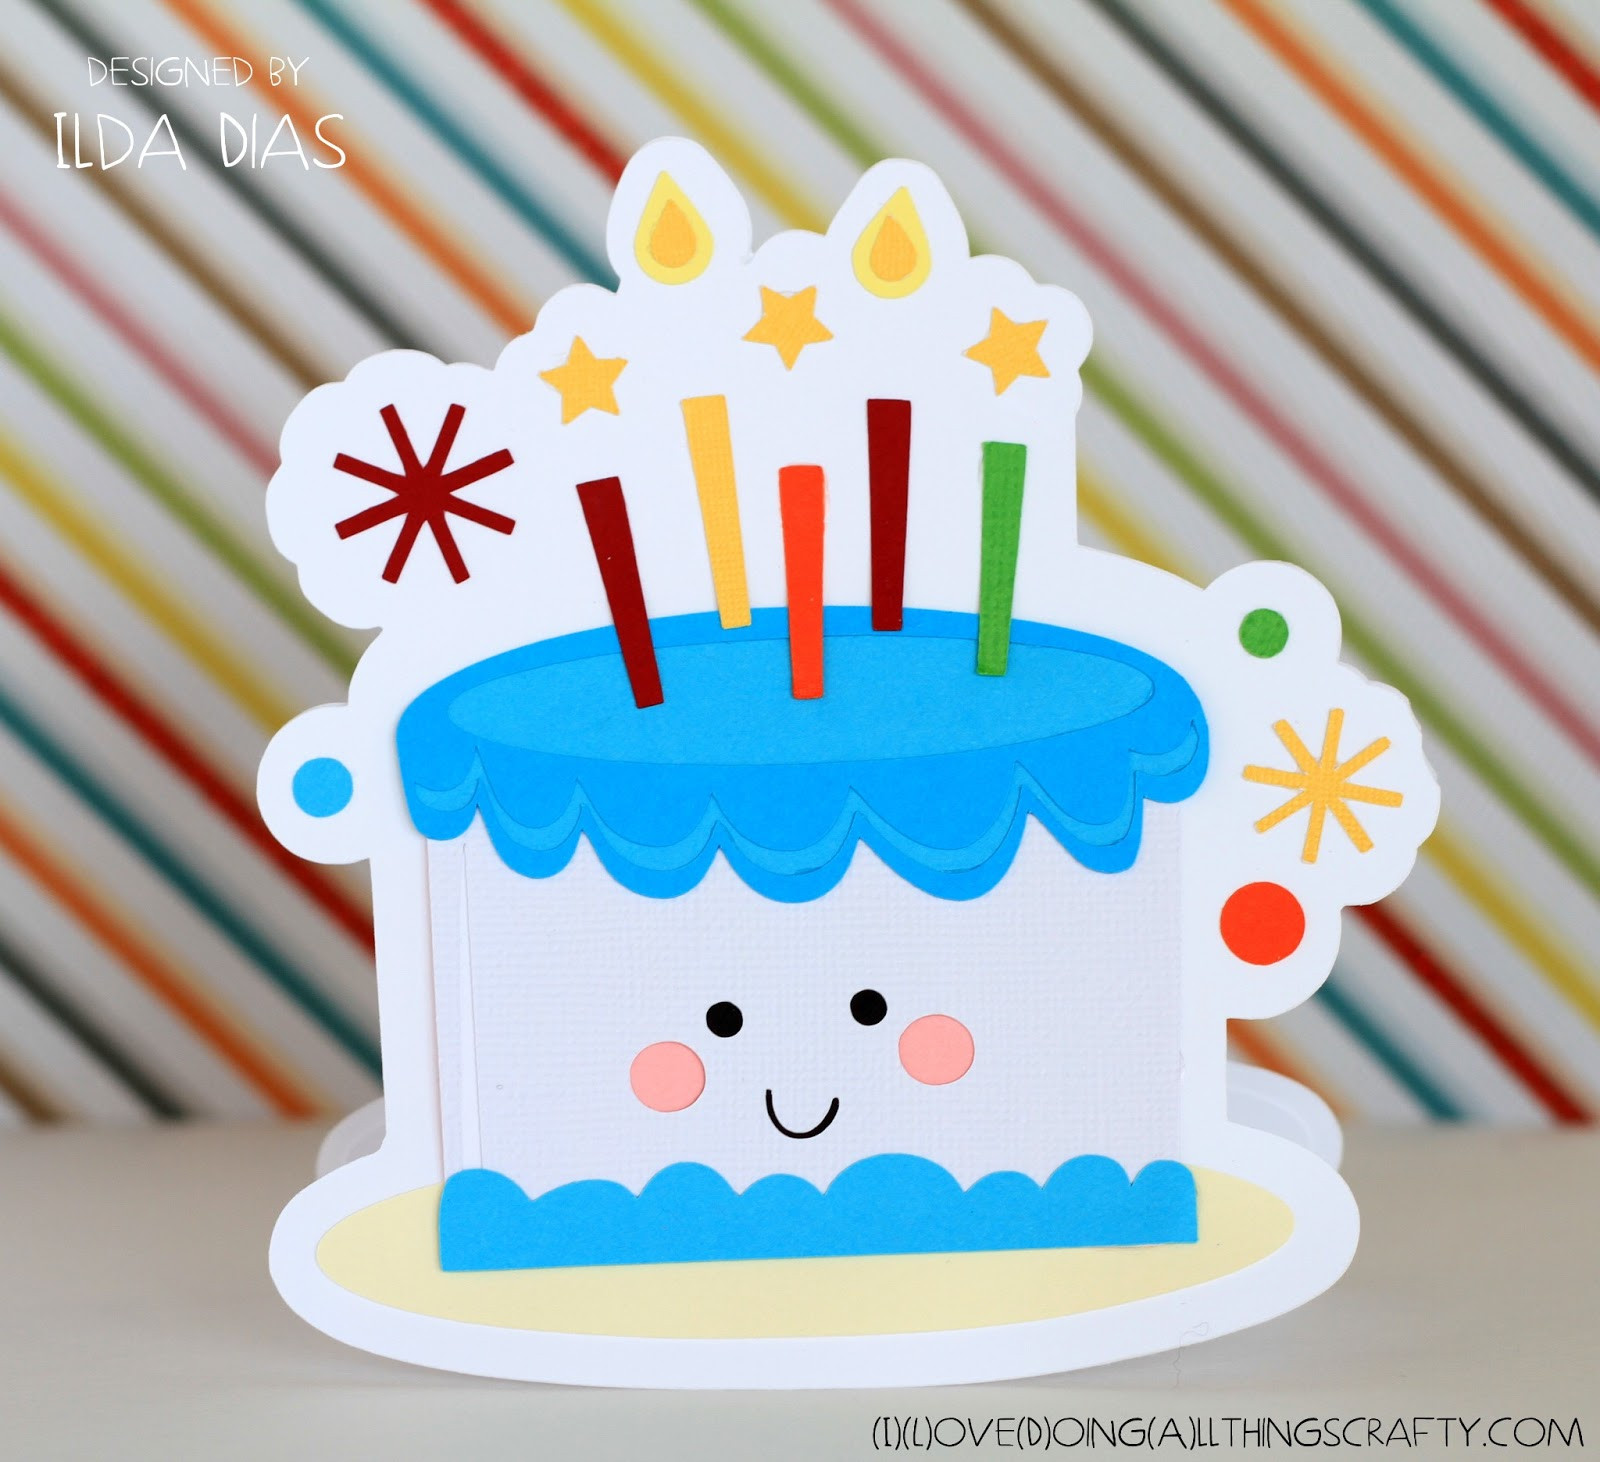 Best ideas about Birthday Cake Card
. Save or Pin I Love Doing All Things Crafty Happy Birthday Cake Shaped Now.